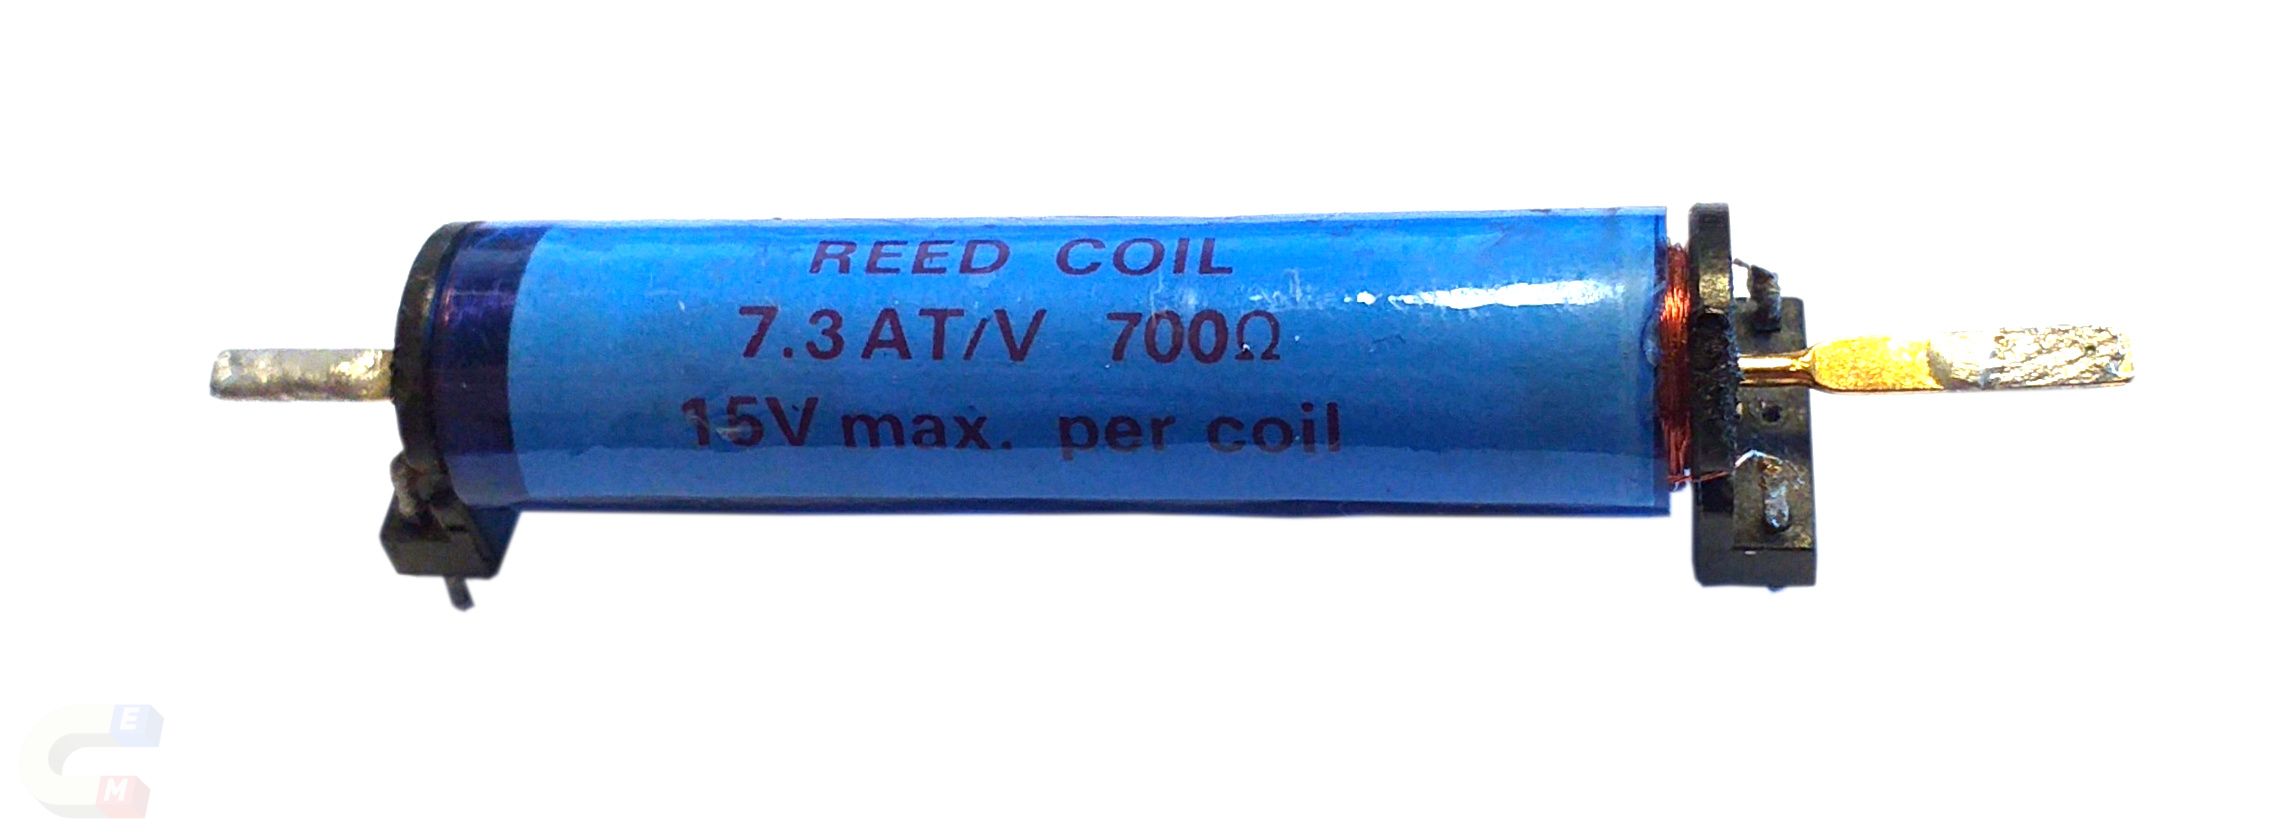 reed_relay_coil_and_tube_1_magnetica.jpg